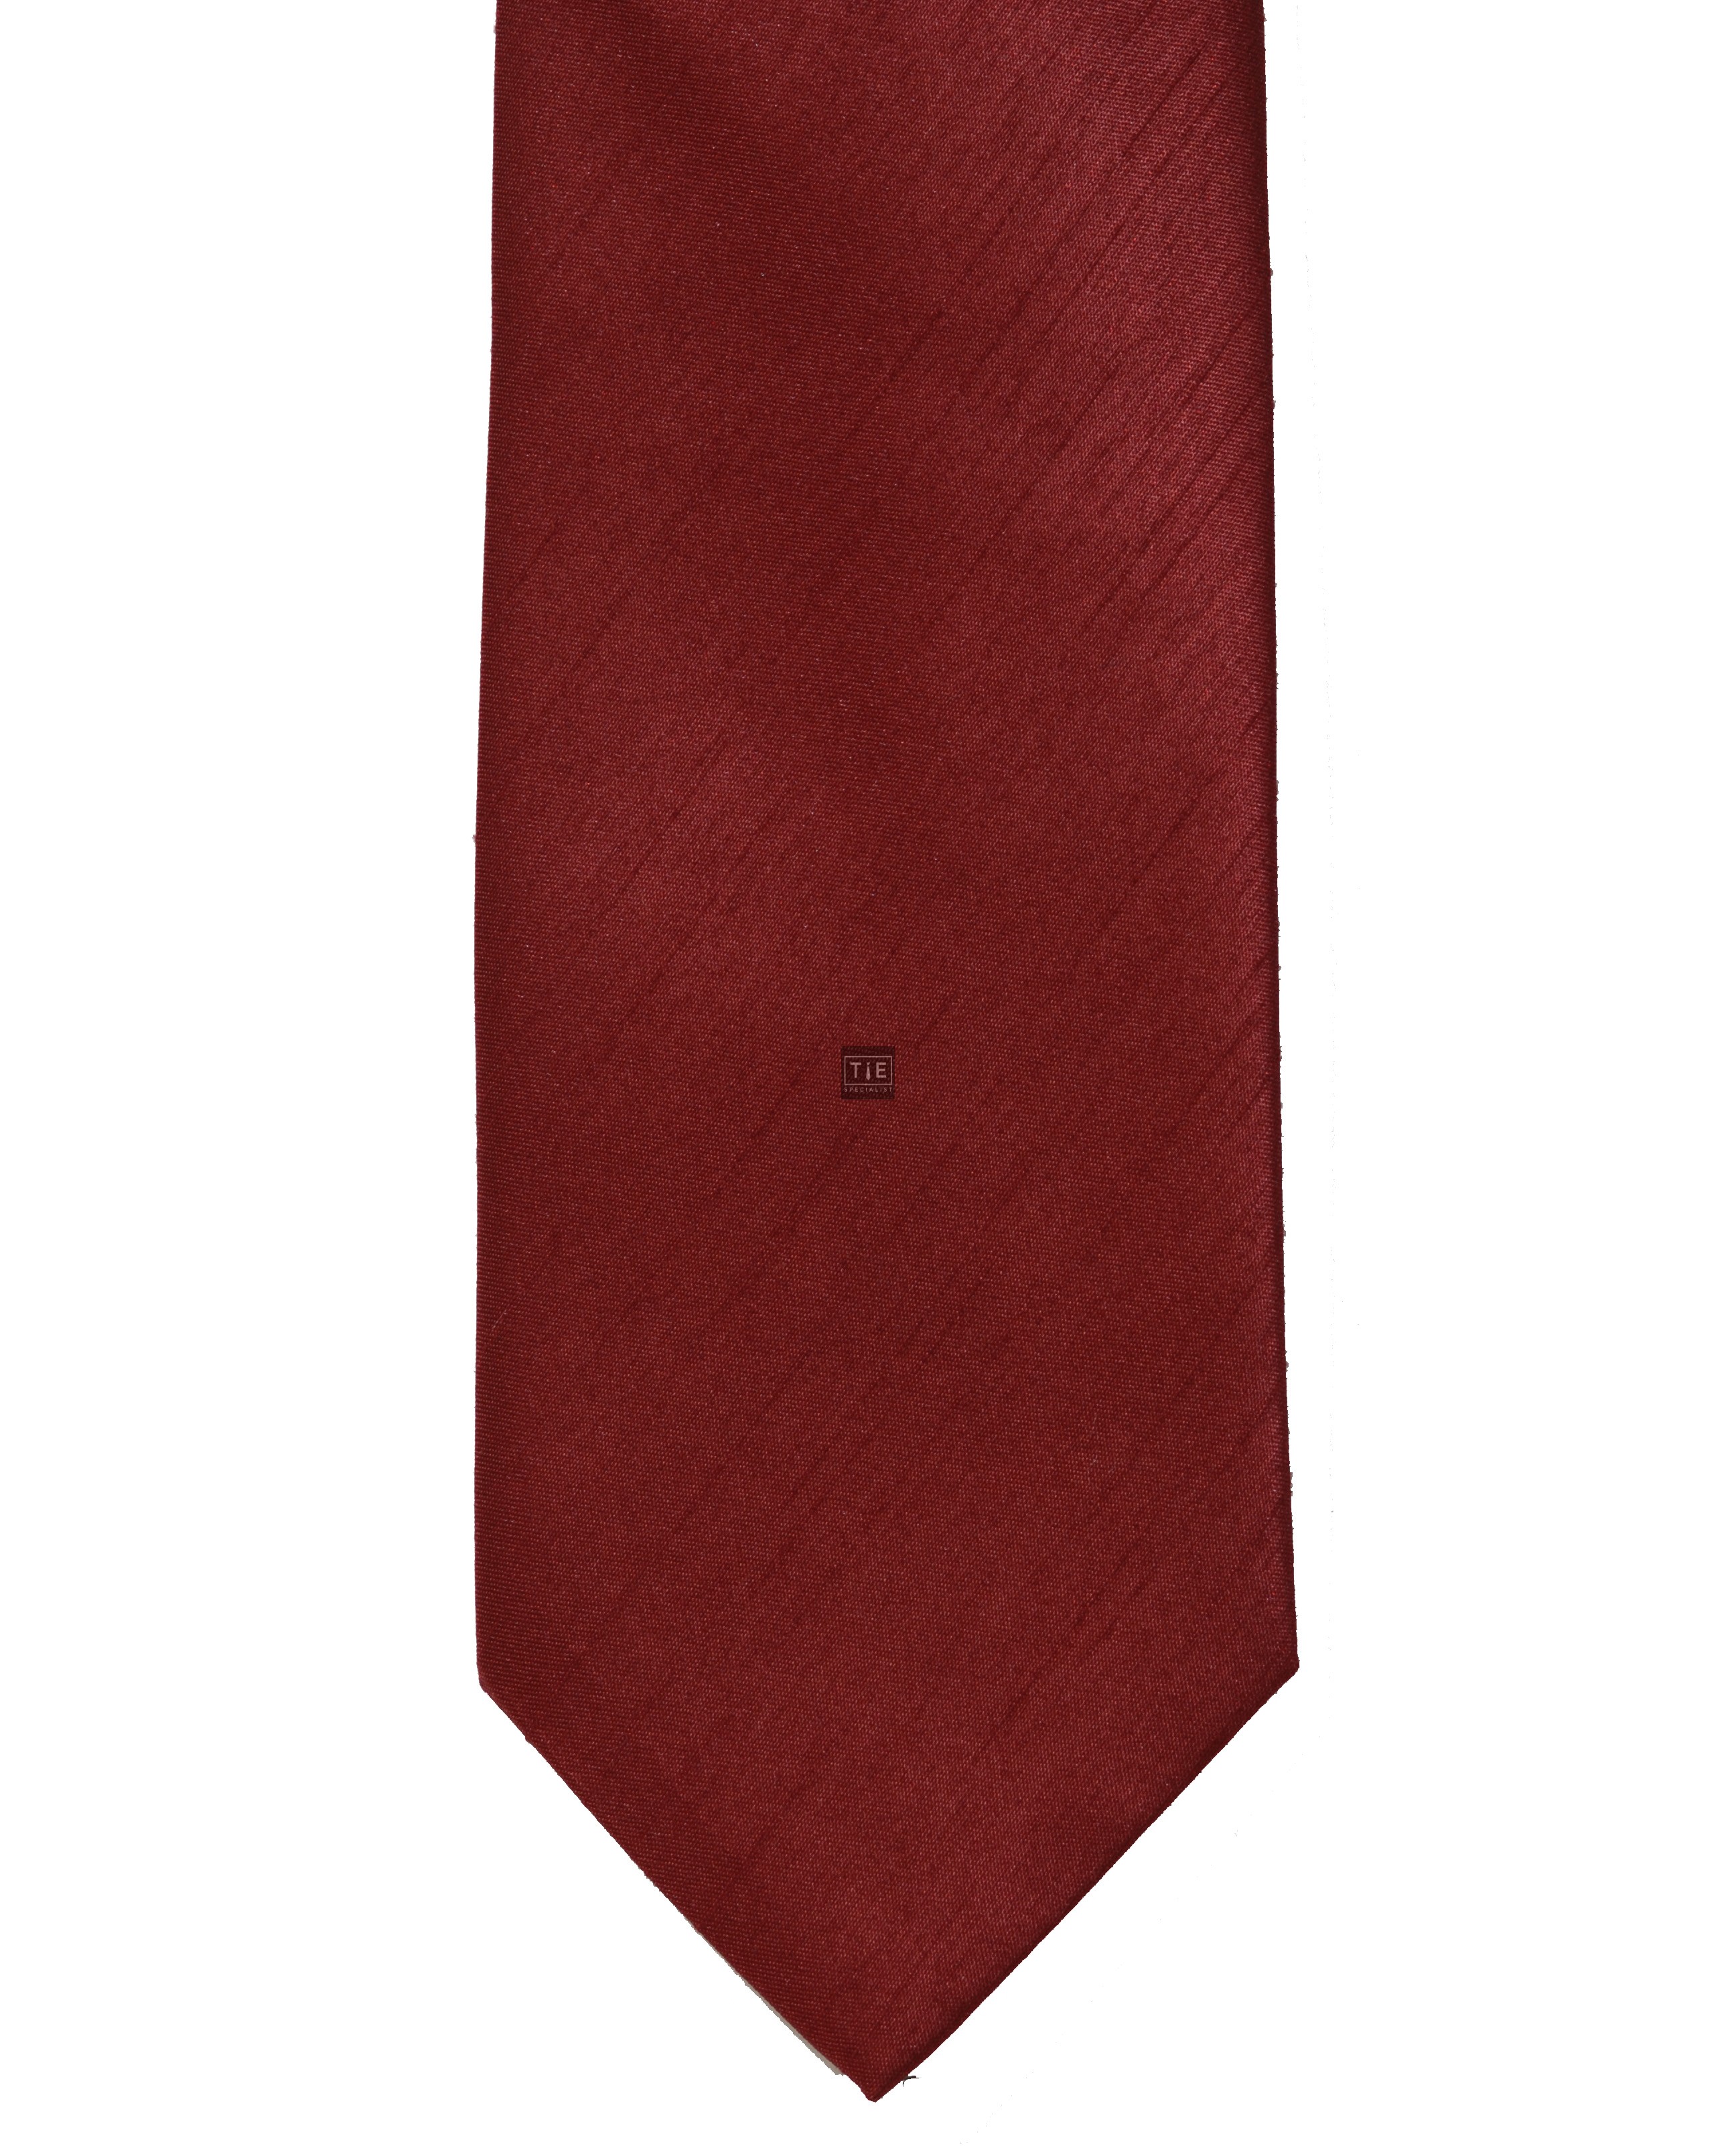 Red Shantung Tie with Matching Pocket Hankie